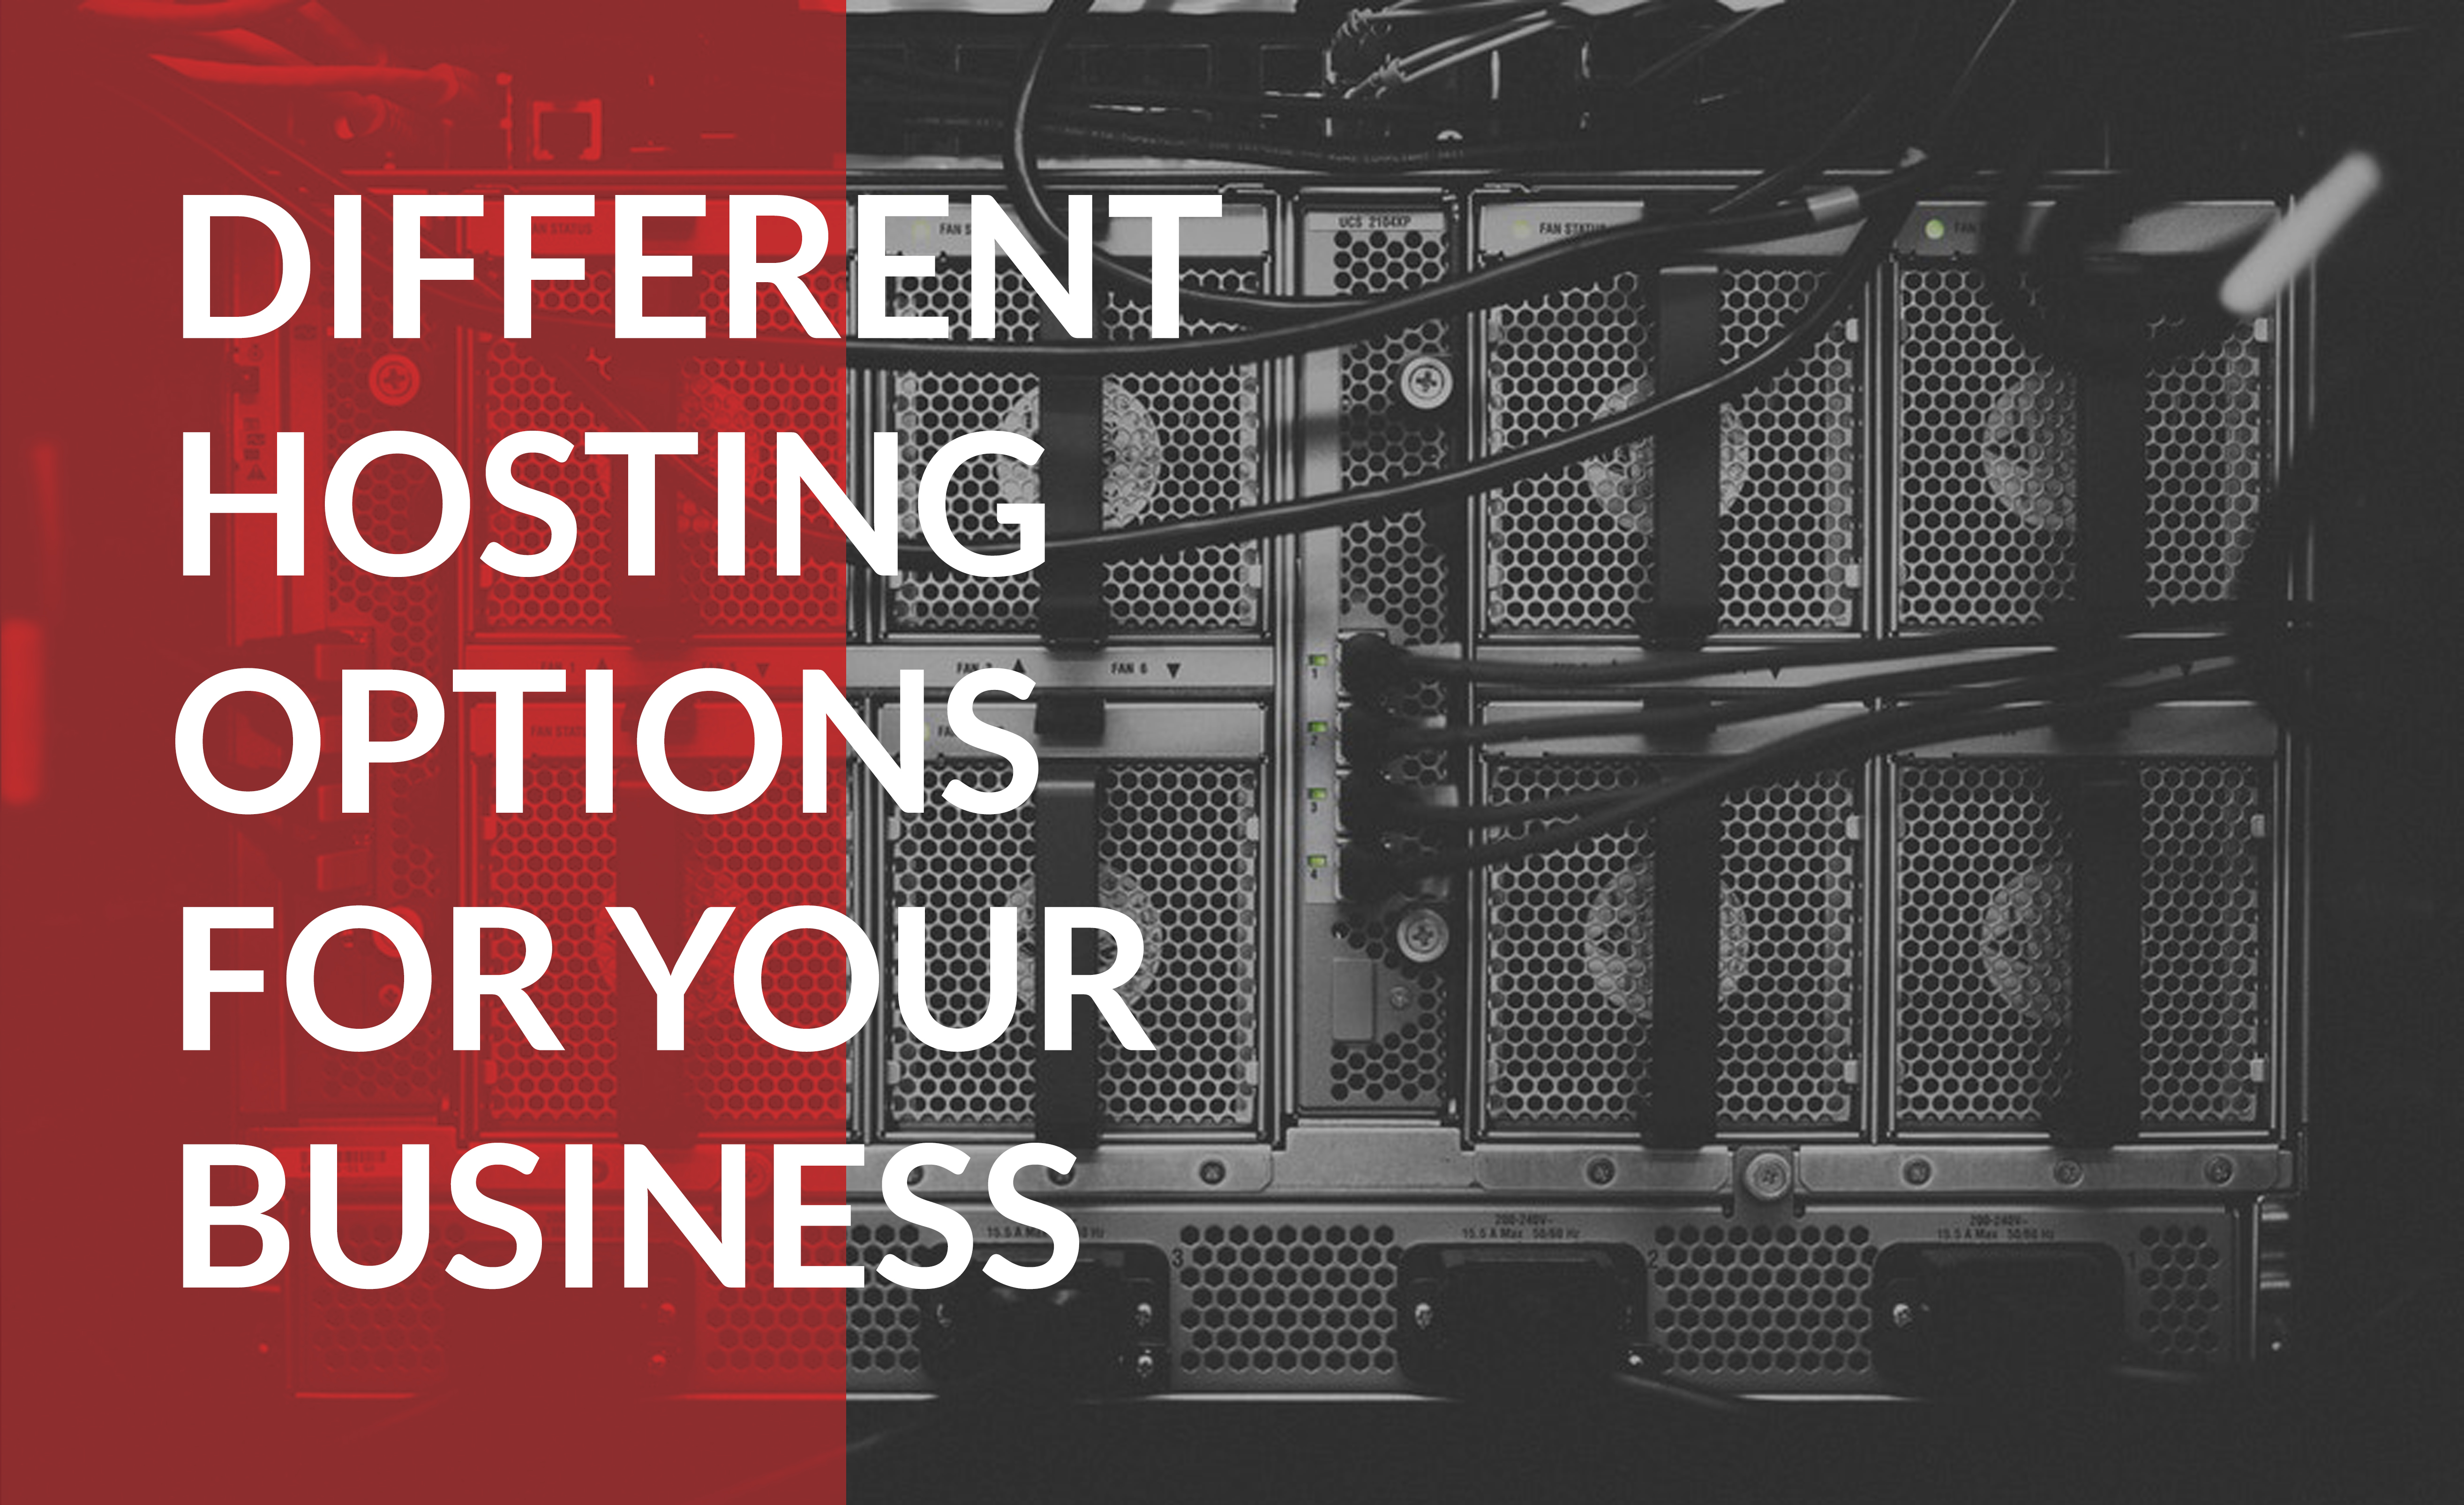 Find out how different hosting options affect your business.